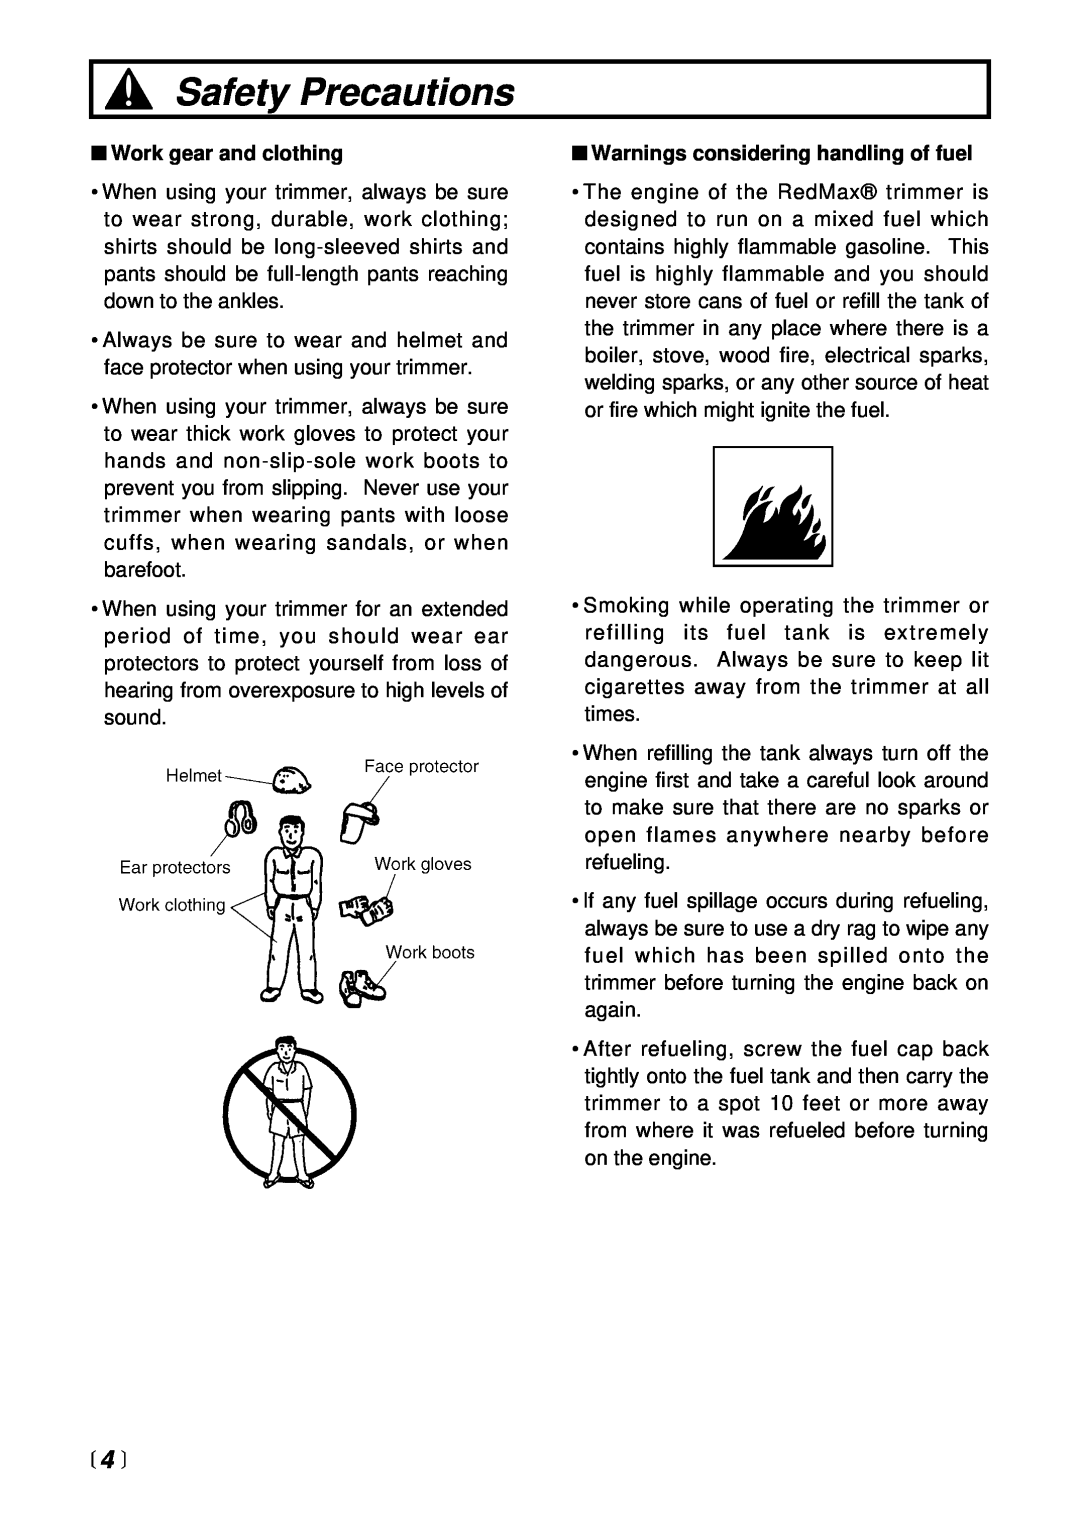 RedMax LRT2300 manual Safety Precautions,  4 , Work gear and clothing, Warnings considering handling of fuel 